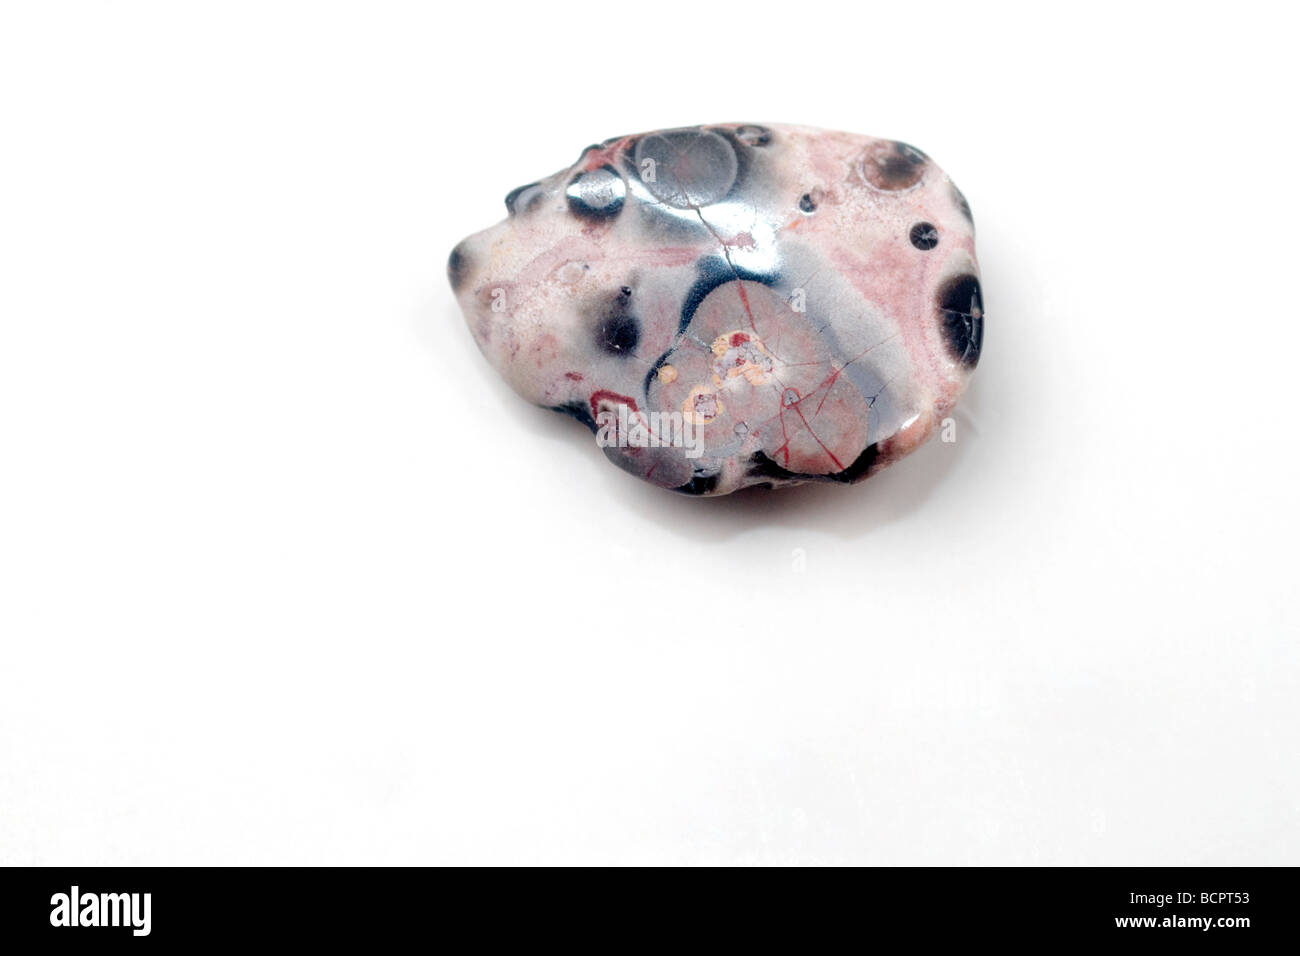 Cutout of a Leopard Skin gemstone on white background Stock Photo